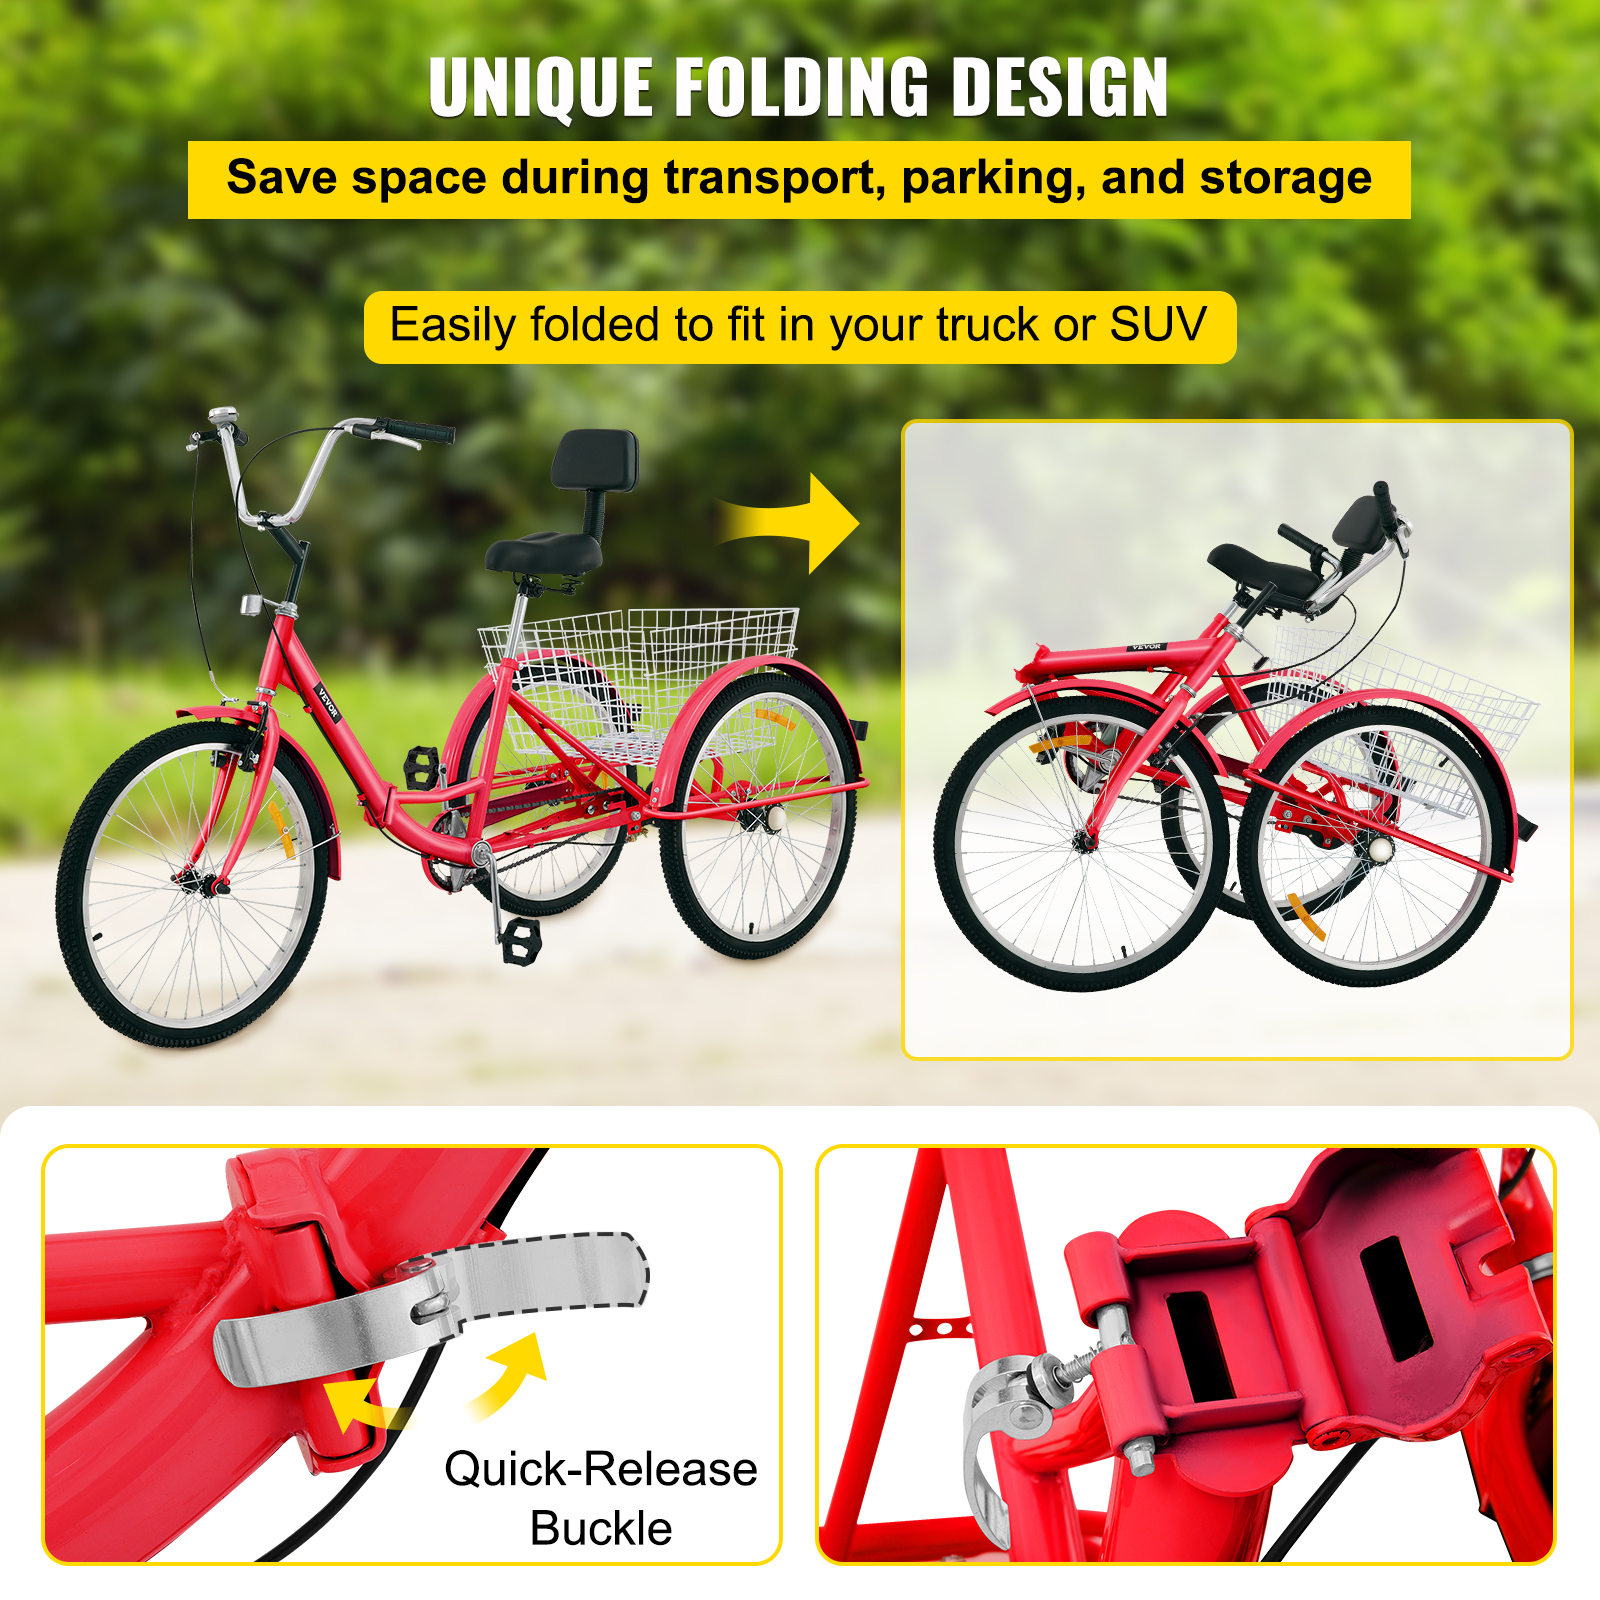 VEVOR Foldable Tricycle 24 inch Wheels,1-Speed Red Trike, 3 Wheels Colorful Bike with Basket, Portable and Foldable Bicycle for Adults Exercise Shopping Picnic Outdoor Activities - image 3 of 9